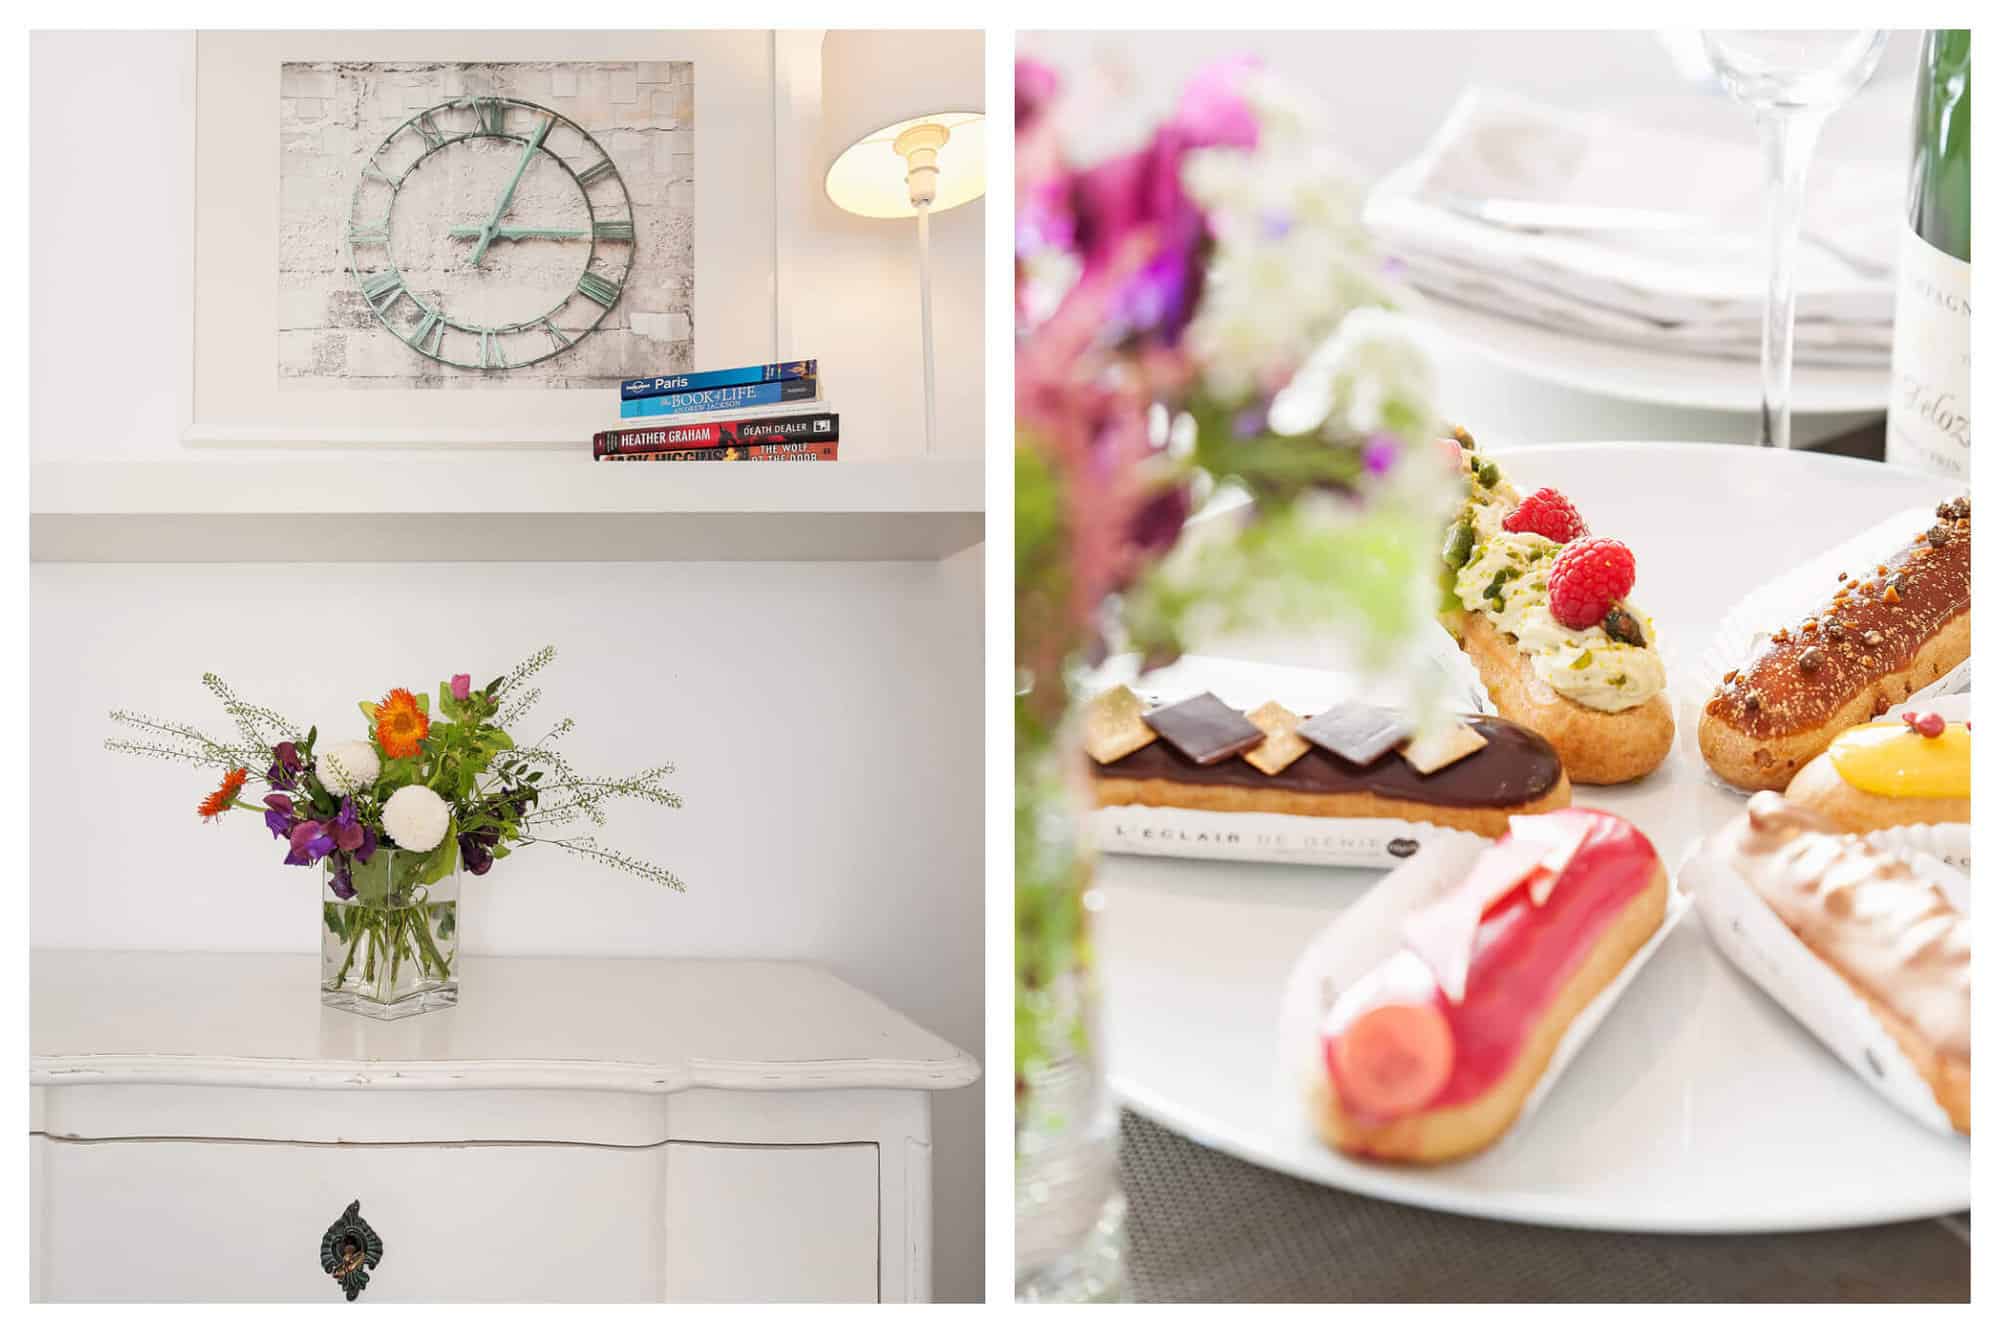 Left: a vase of flowers on a chest of drawers with a shelf above. On the shelf are books and a lamp, and above is a framed picture of a clock. Right: a plate of eclairs on a table with a vase of flowers in the foreground and a bottle of wine and wine glass in the background. 